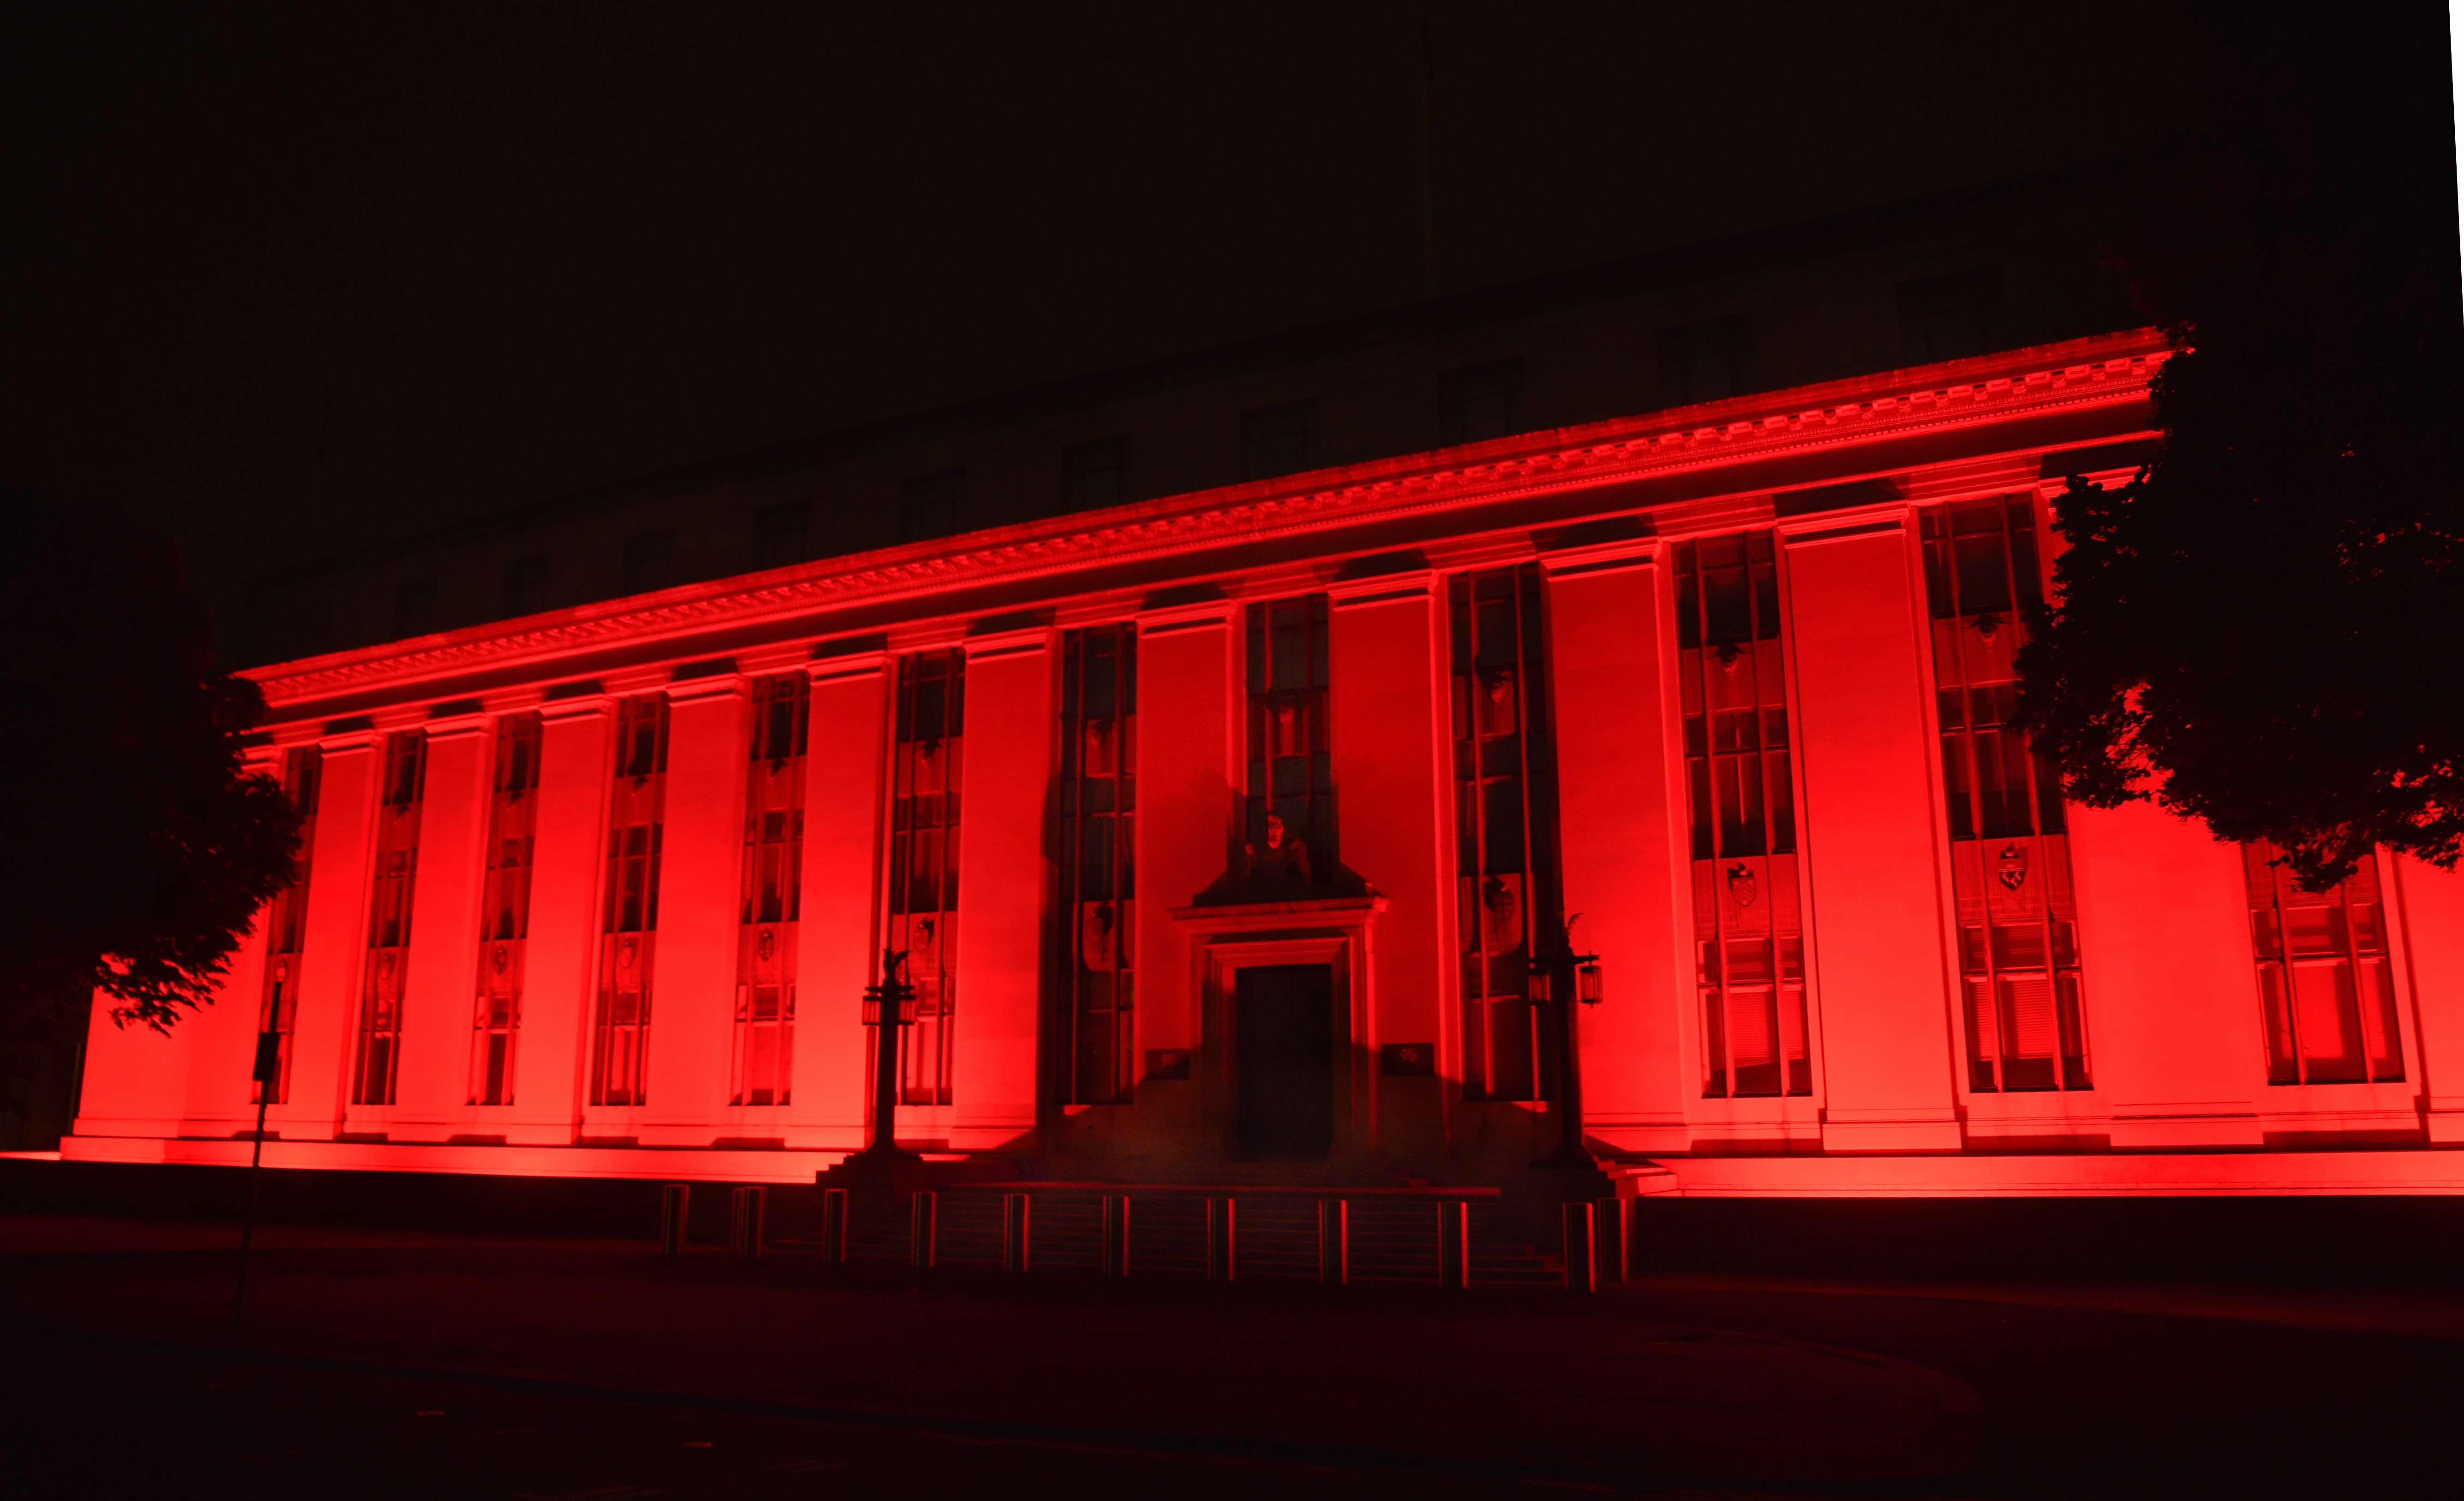 Welsh Government's Cathays Park was lit up in red to celebrate Red4Research day